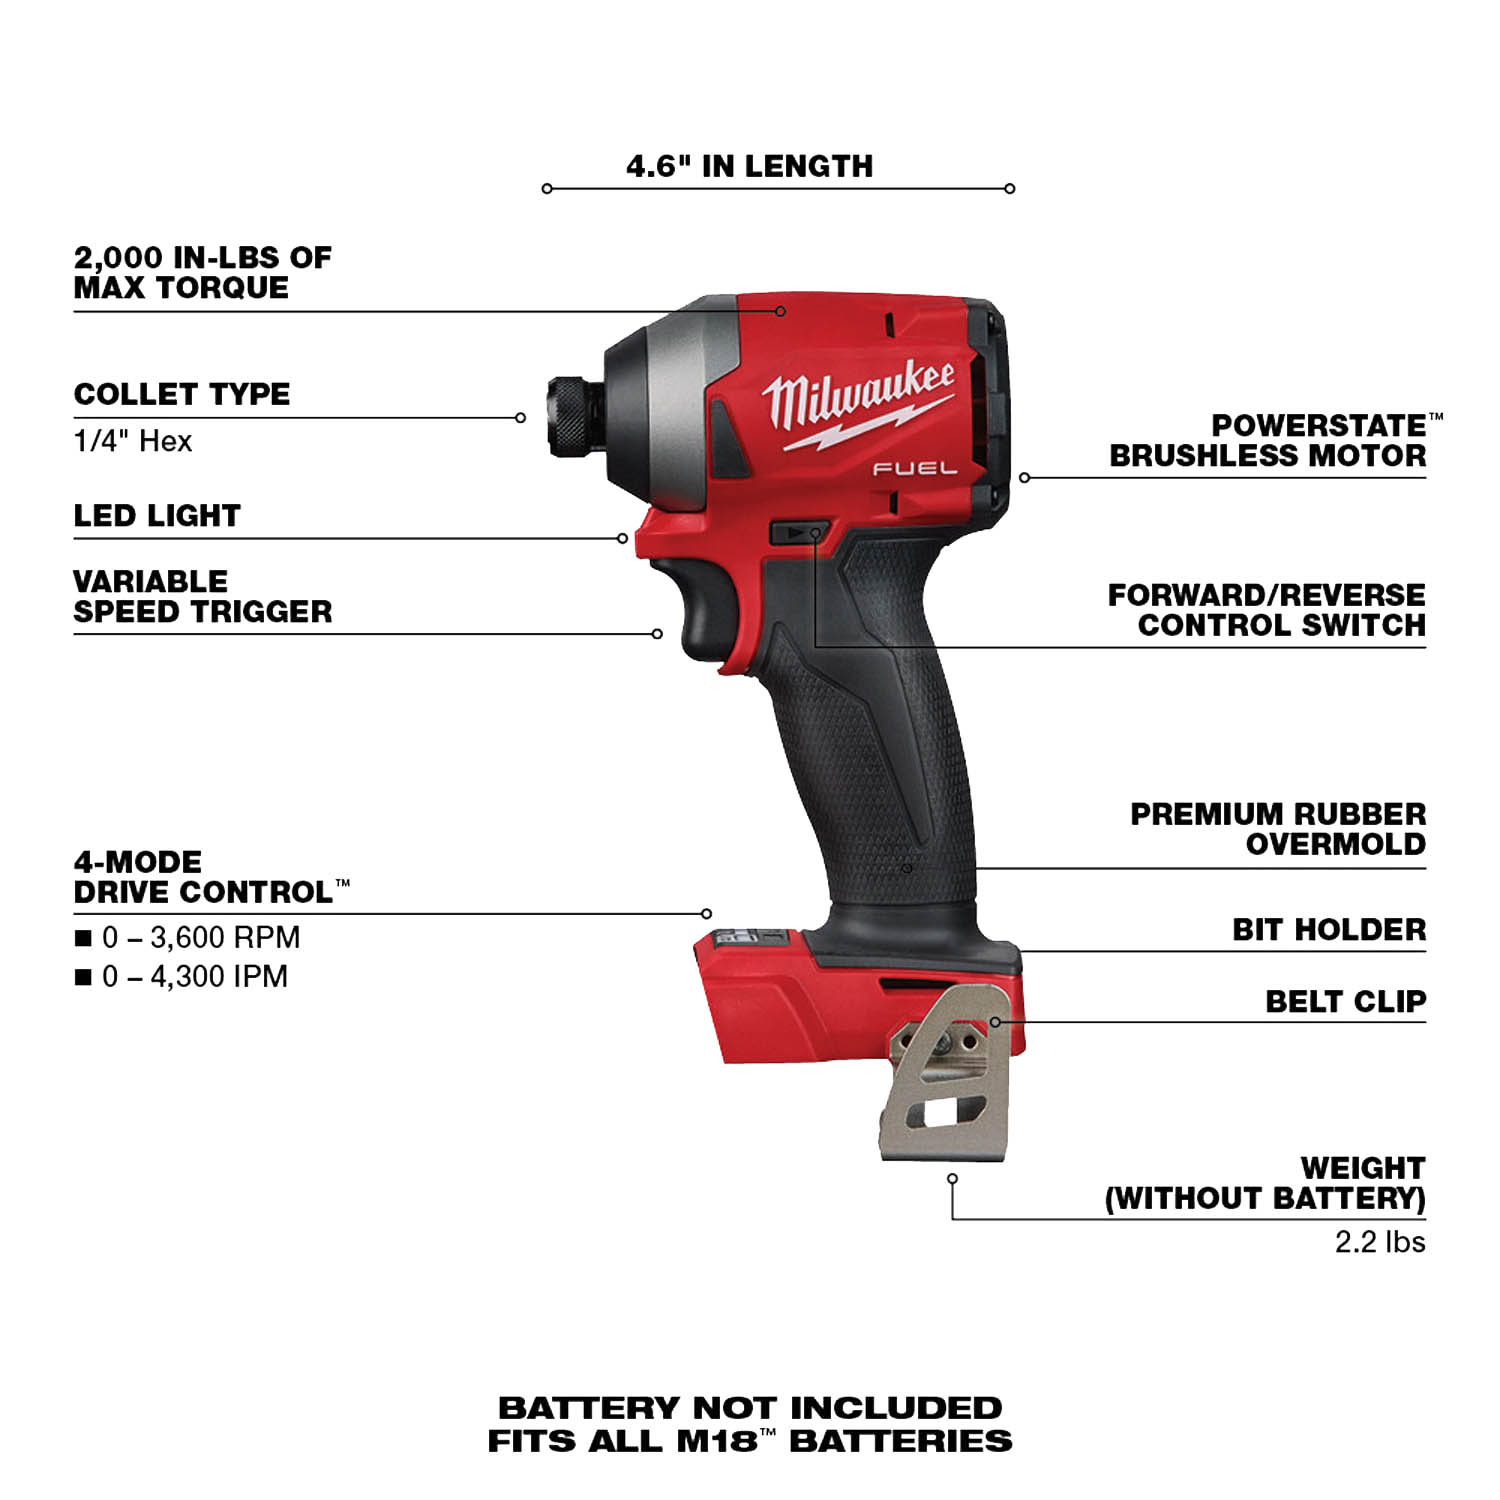 M18 FUEL 1/4 INCH HEX IMPACT DRIVER (TOOL ONLY)